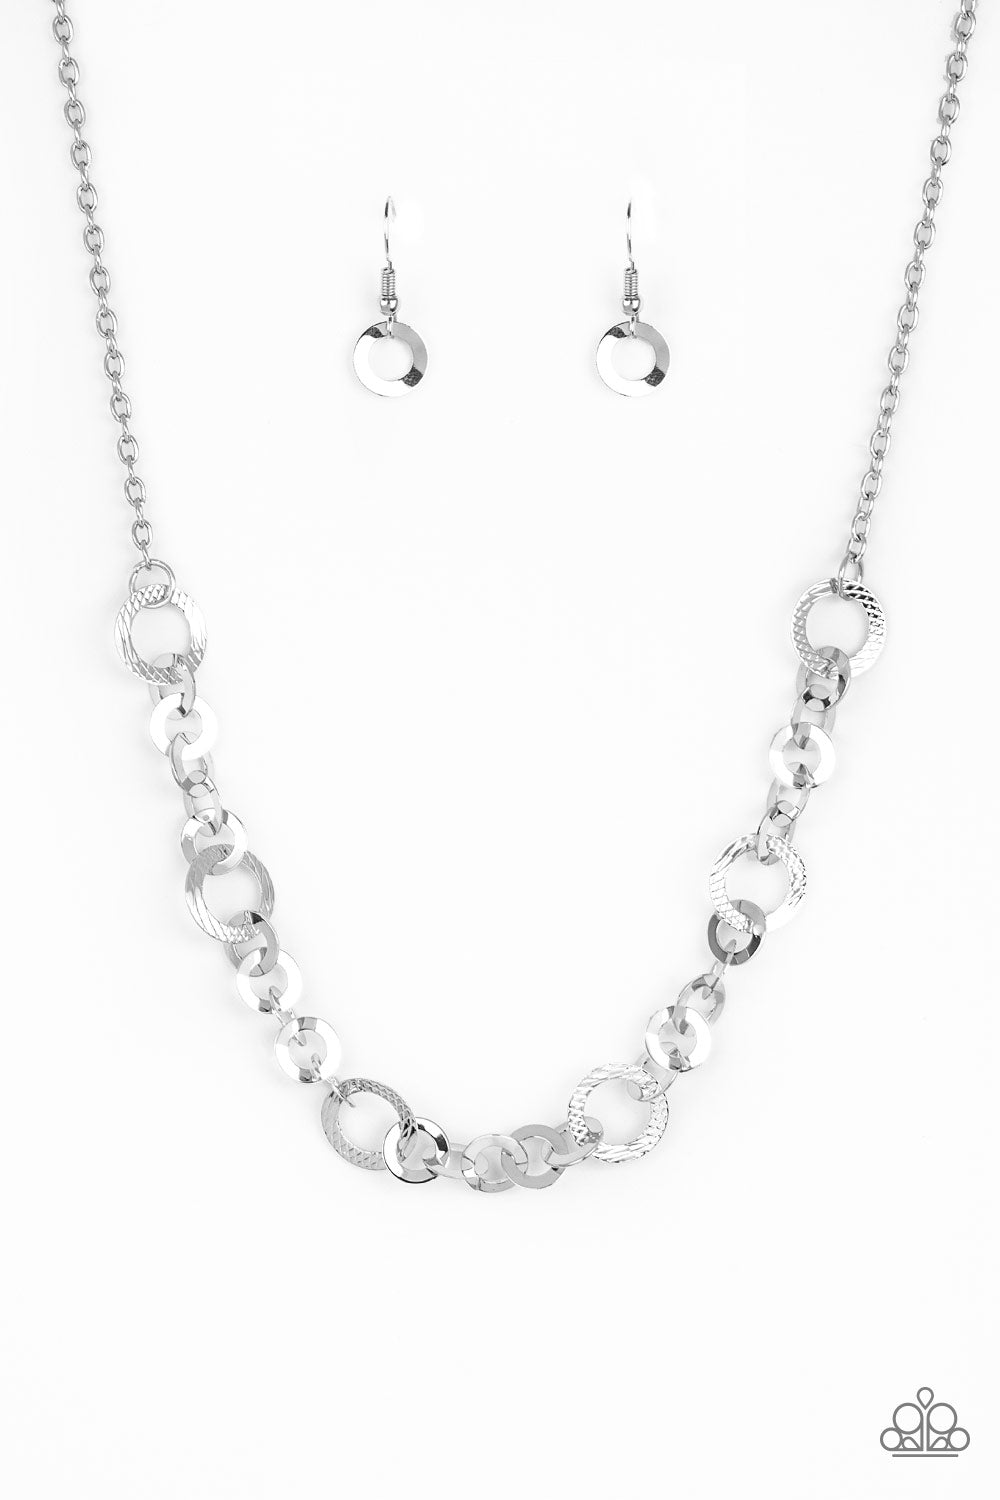 MOVE IT ON OVER - SILVER NECKLACE